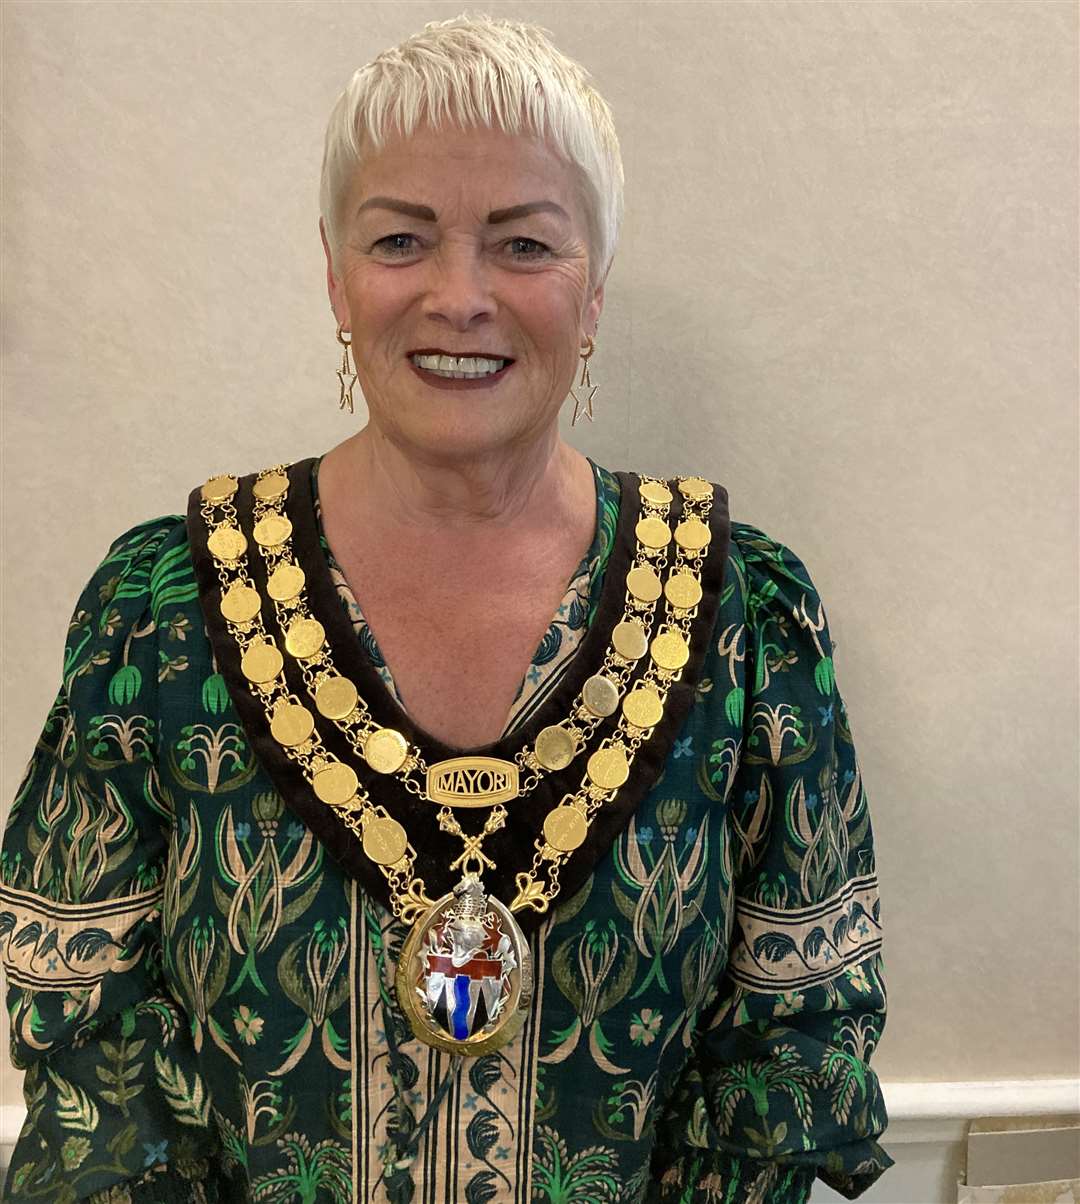 The Mayor of Tonbridge and Malling, Cllr Sue Bell